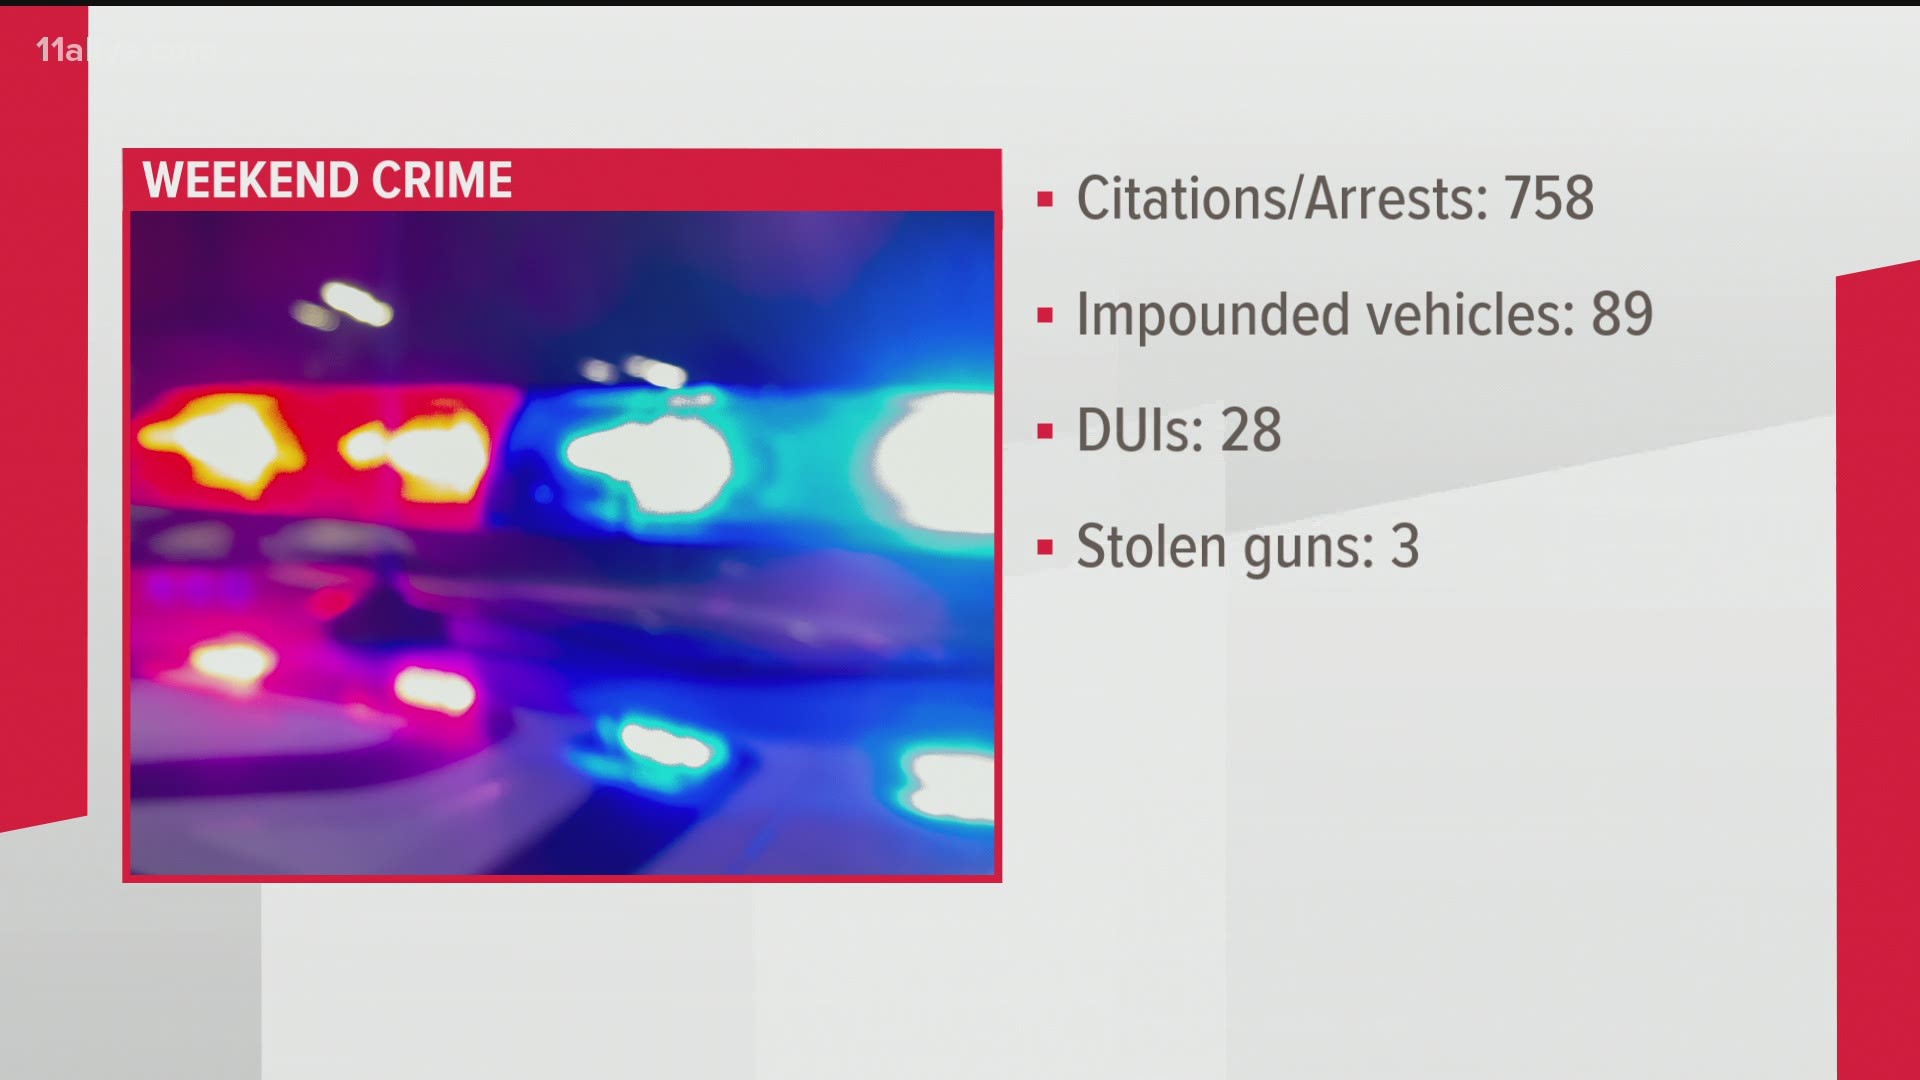 The Department of Public Safety issued the stats following a joint jurisdiction crackdown on crime.